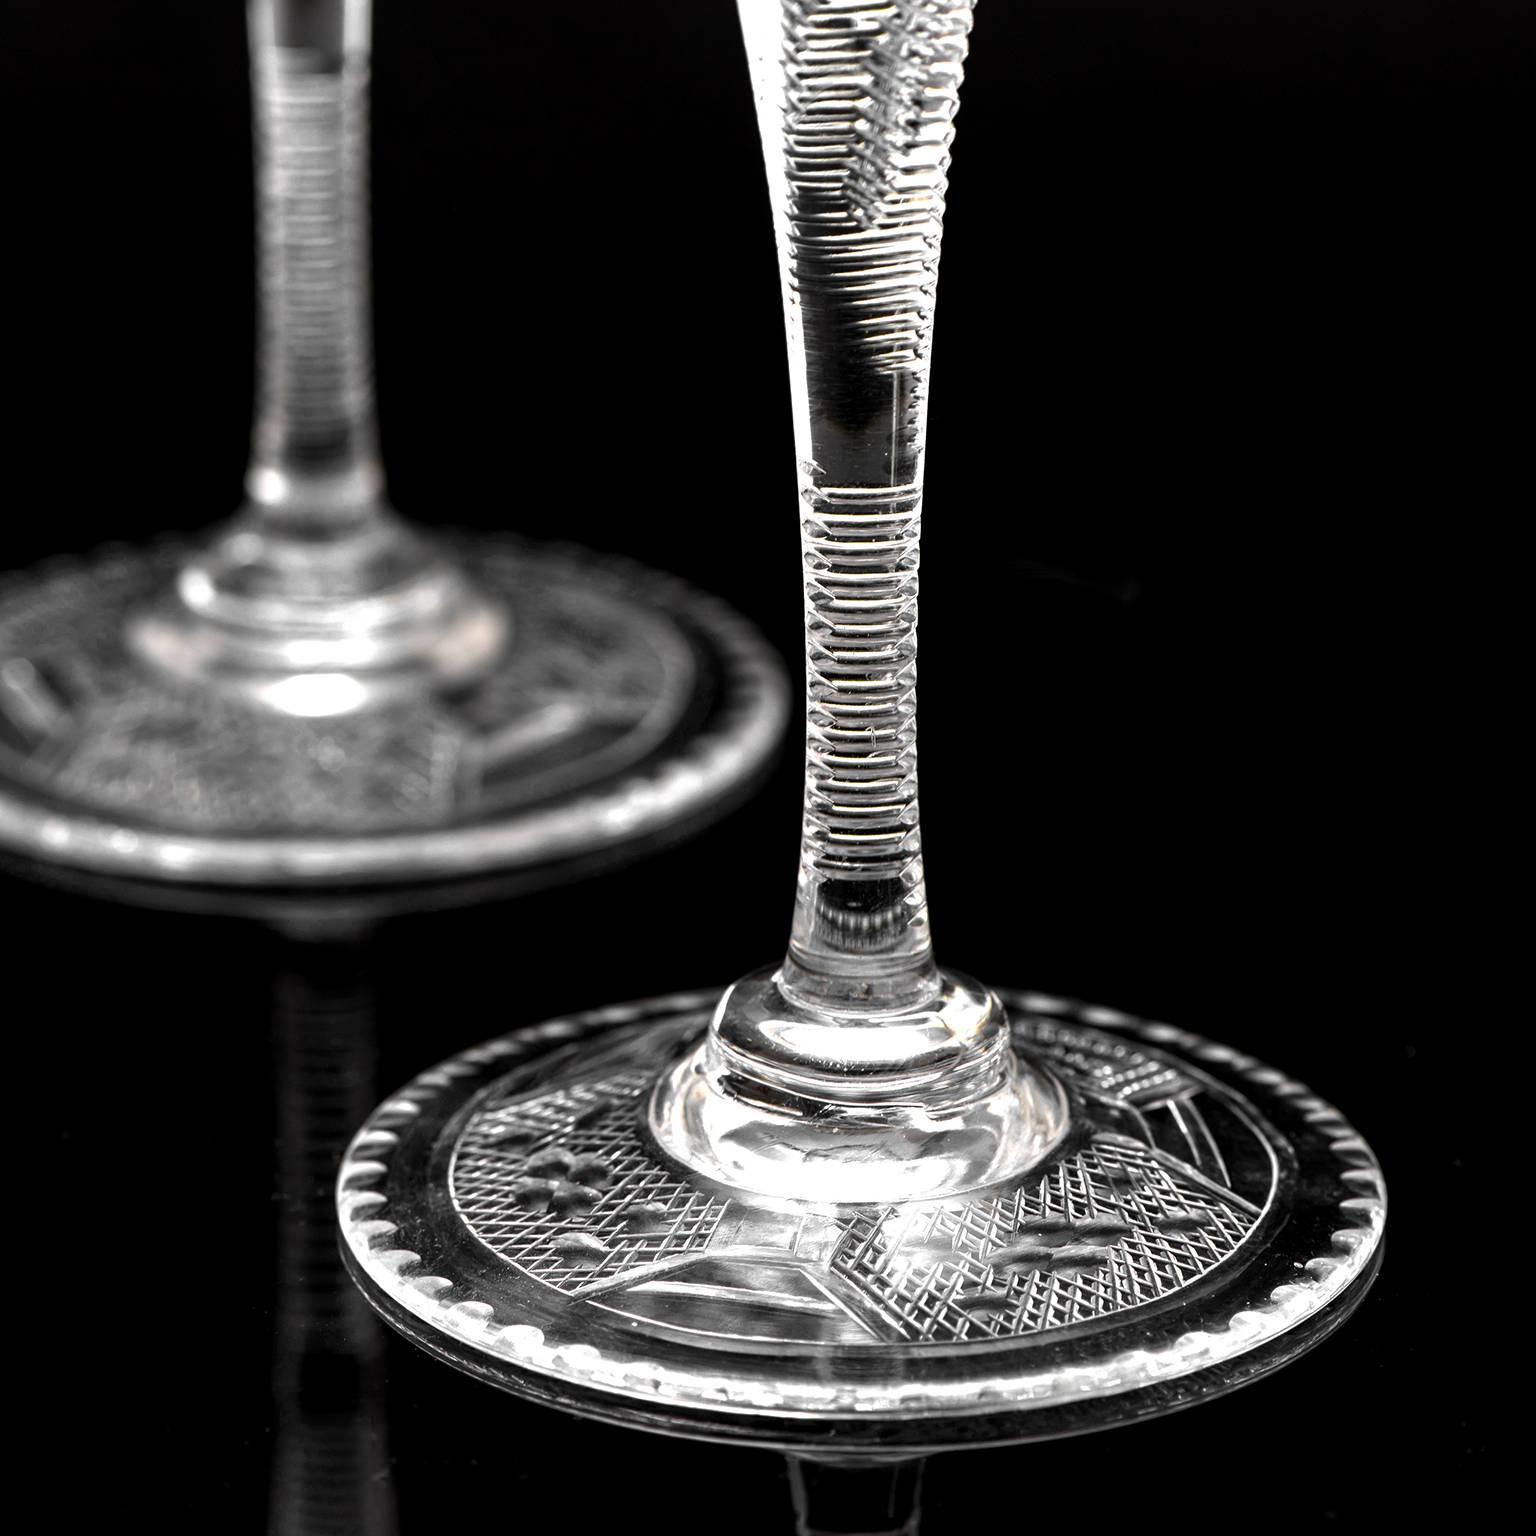 Crystal Set of 14 Stevens & Williams Chinoiserie Champagne-Cocktail Goblets